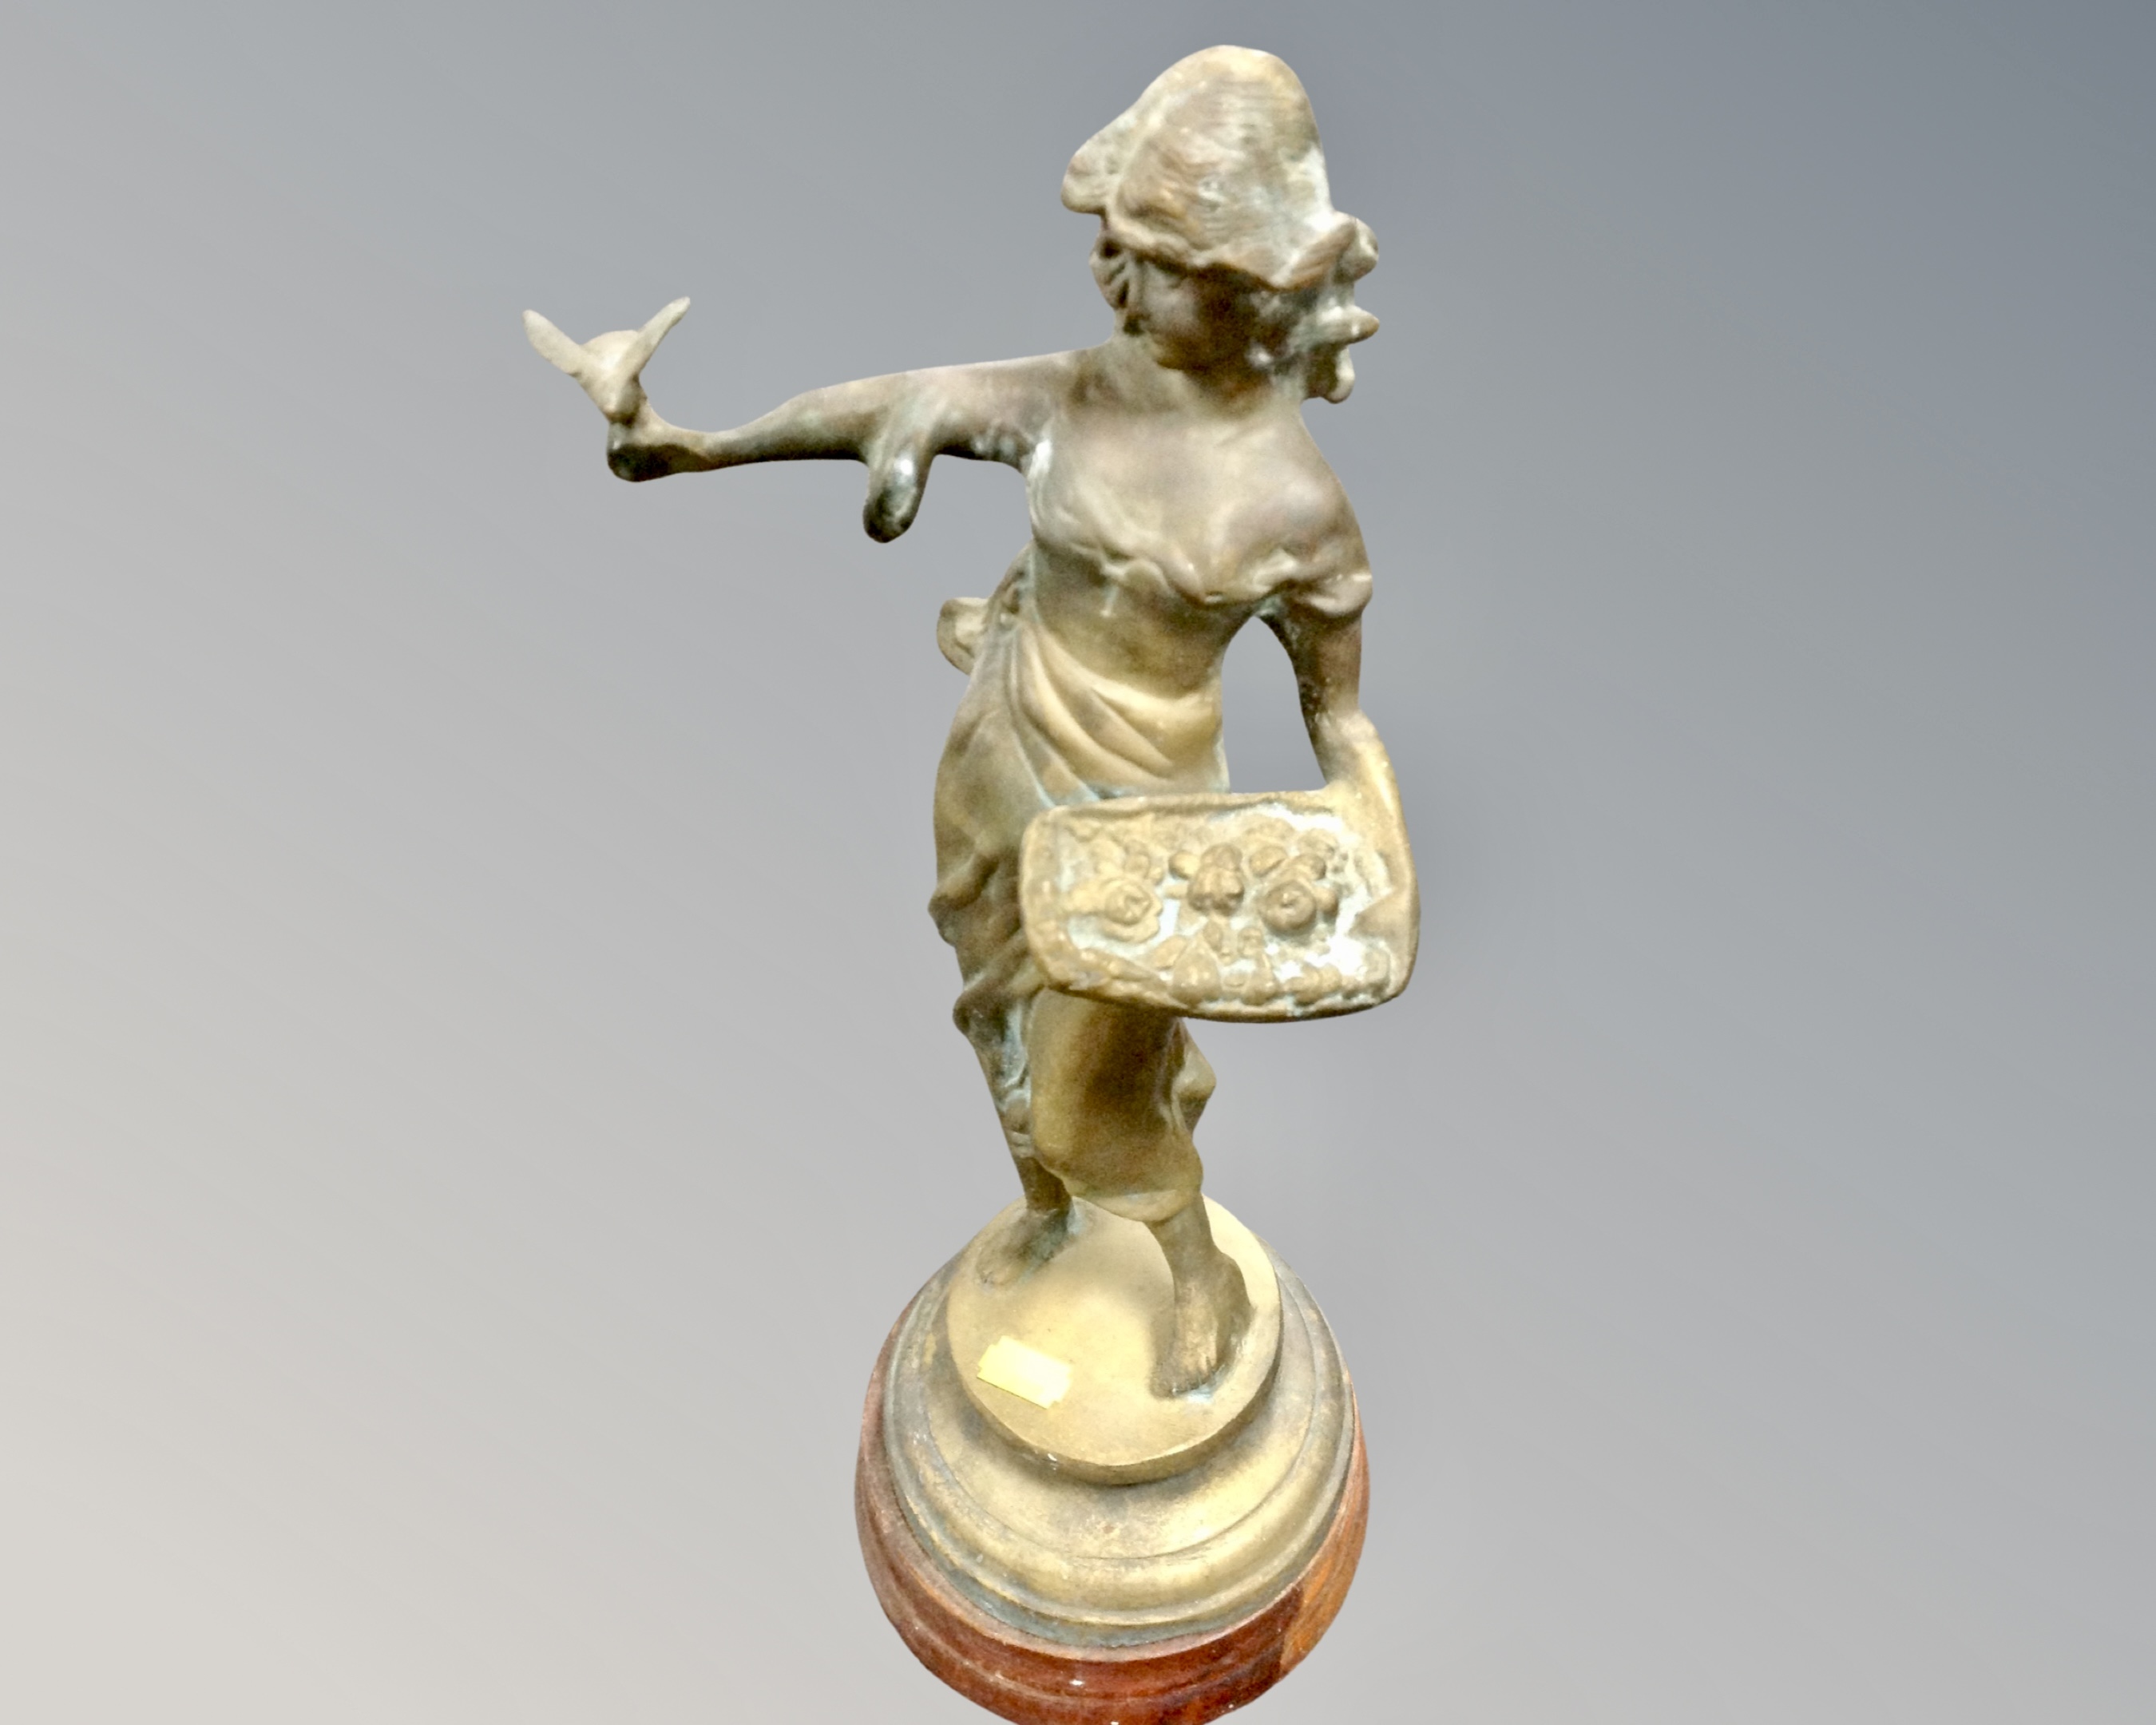 A bronze figure on socle base depicting a lady holding a dove.